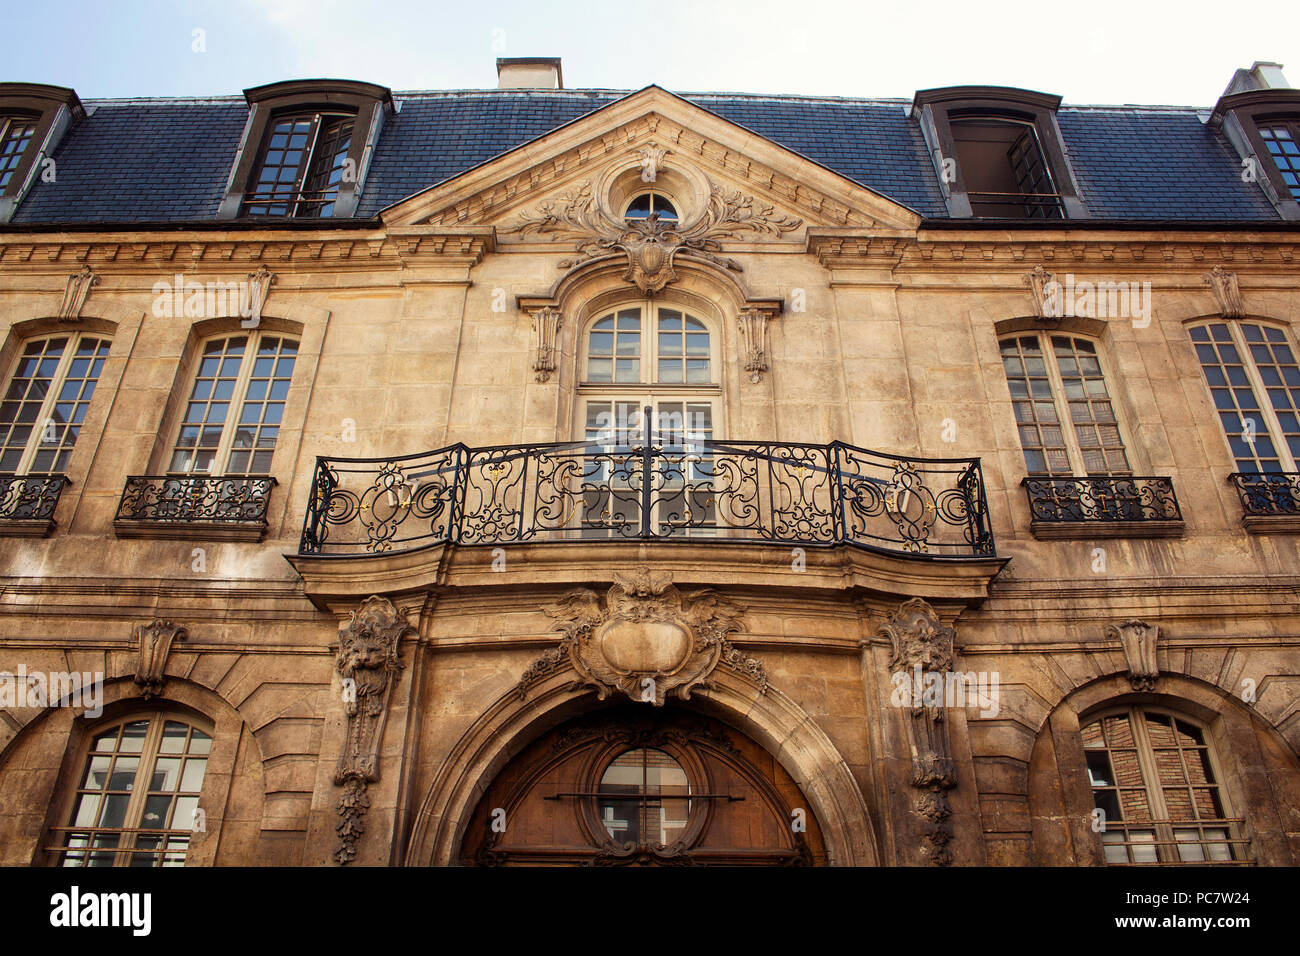 View of a traditional, historical building in Paris showing Parisian / French architectural style. It is a sunny day in spring. 3rd arrondissement Stock Photo